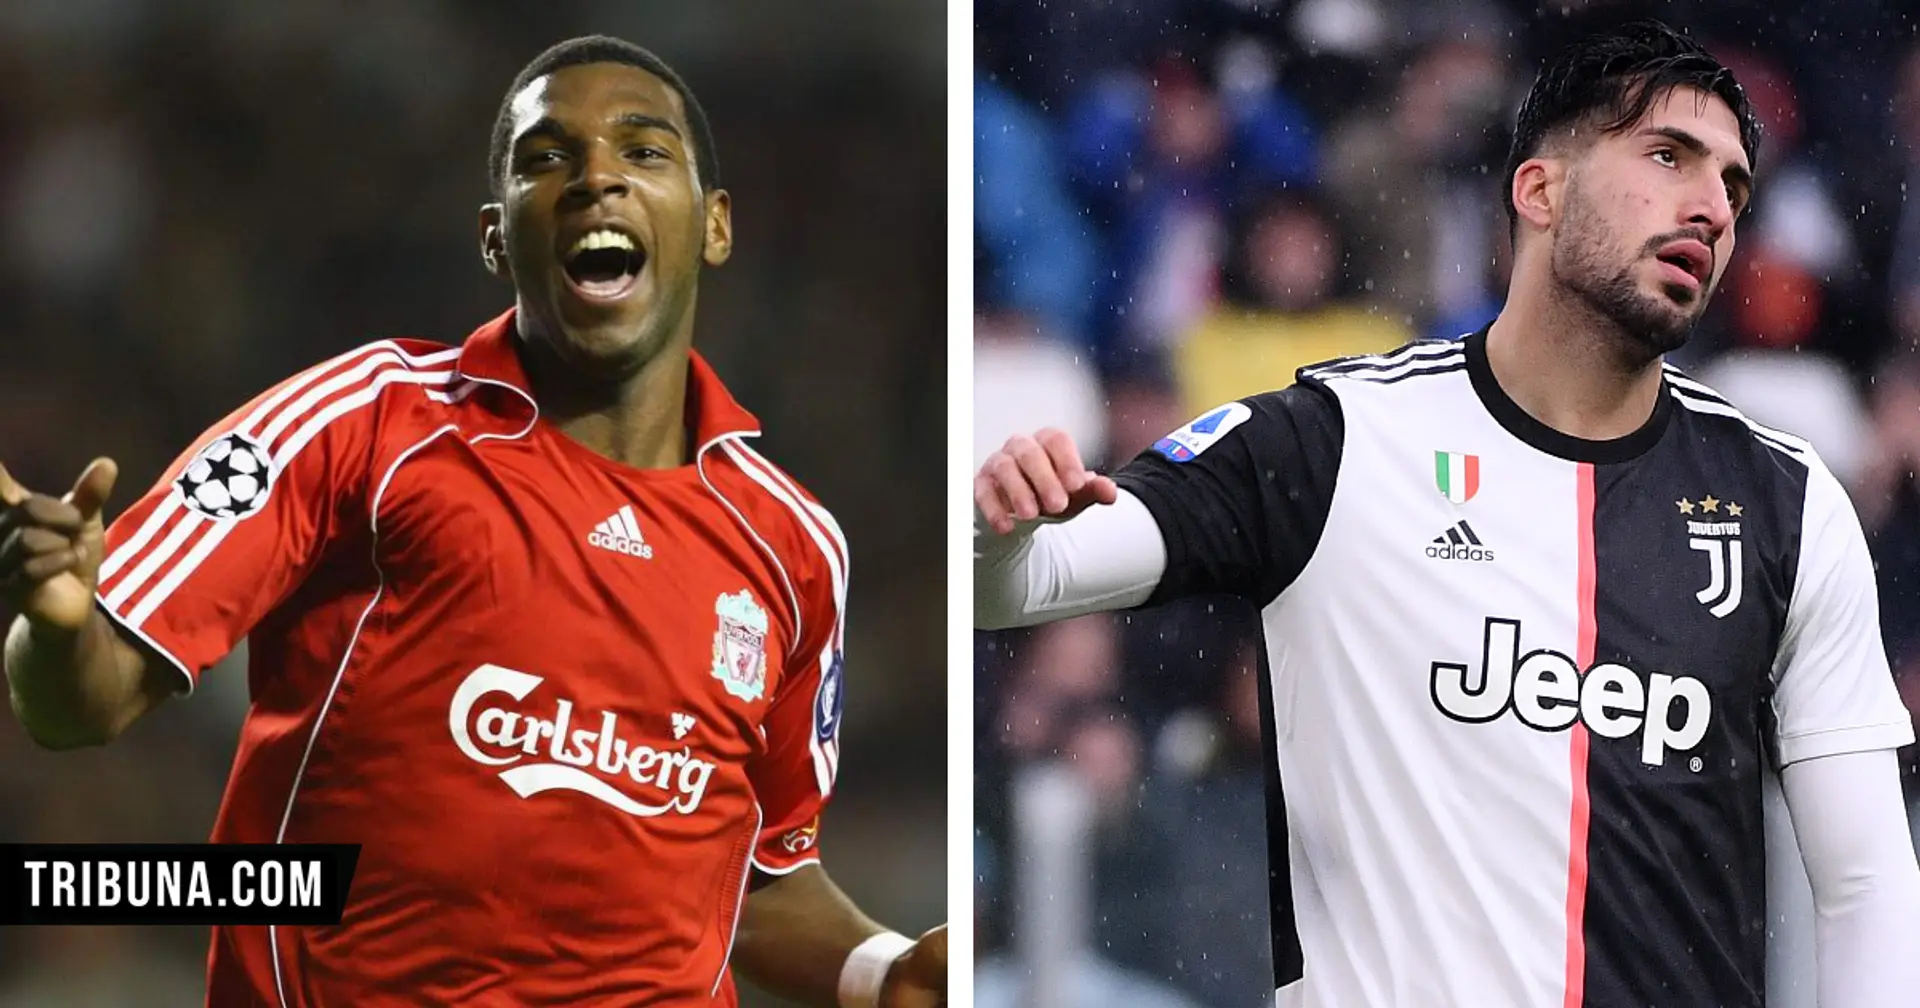 4 Liverpool players who should have been bigger but didn't live up to the hype